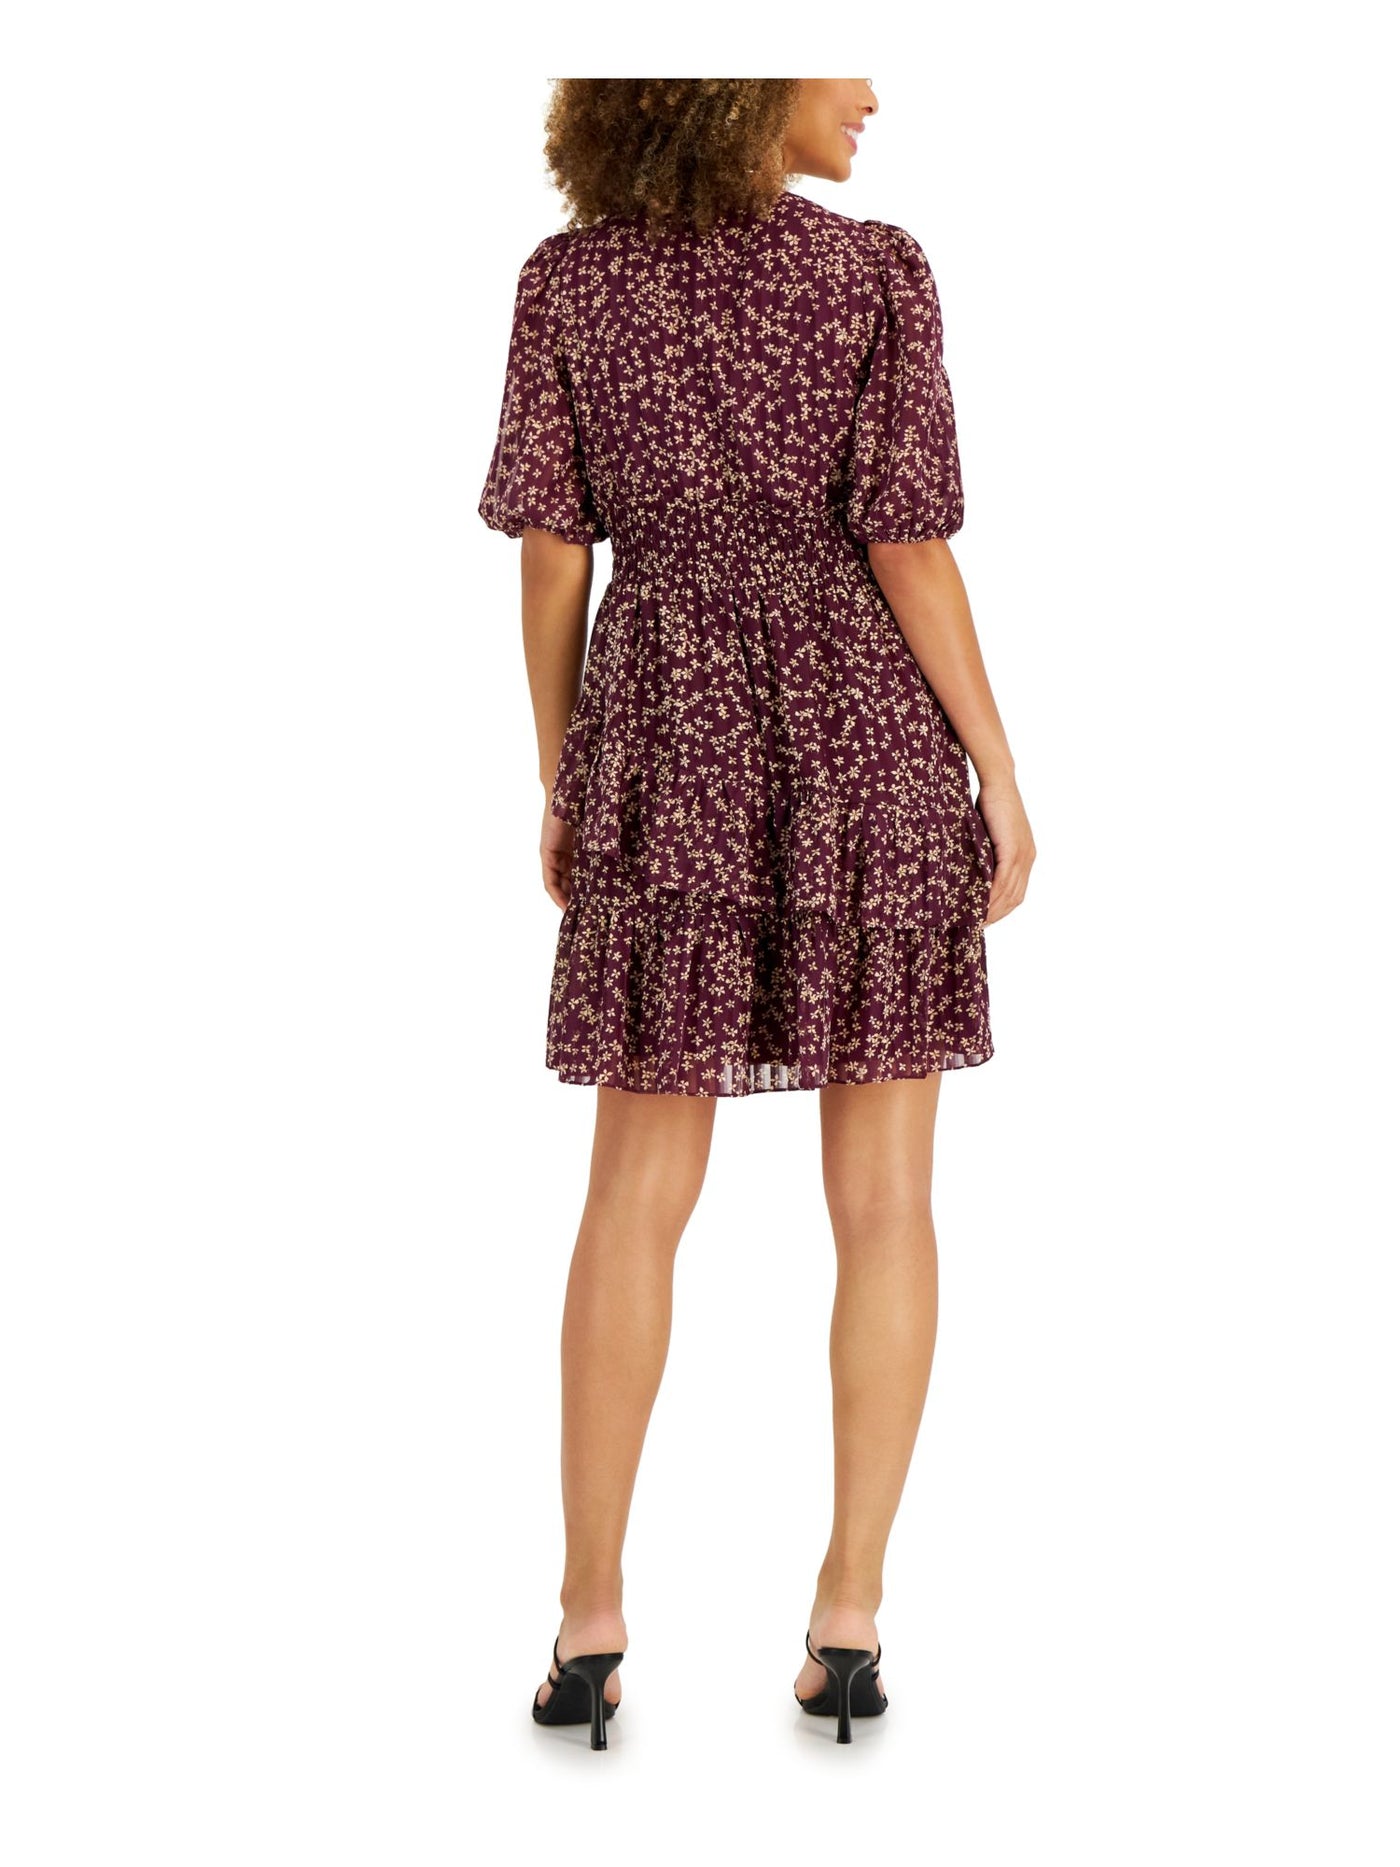 TAYLOR PETITE Womens Purple Lined Smocked Tiered Pullover Sheer Ruffled Floral Pouf Sleeve Split Above The Knee Fit + Flare Dress Petites 4P